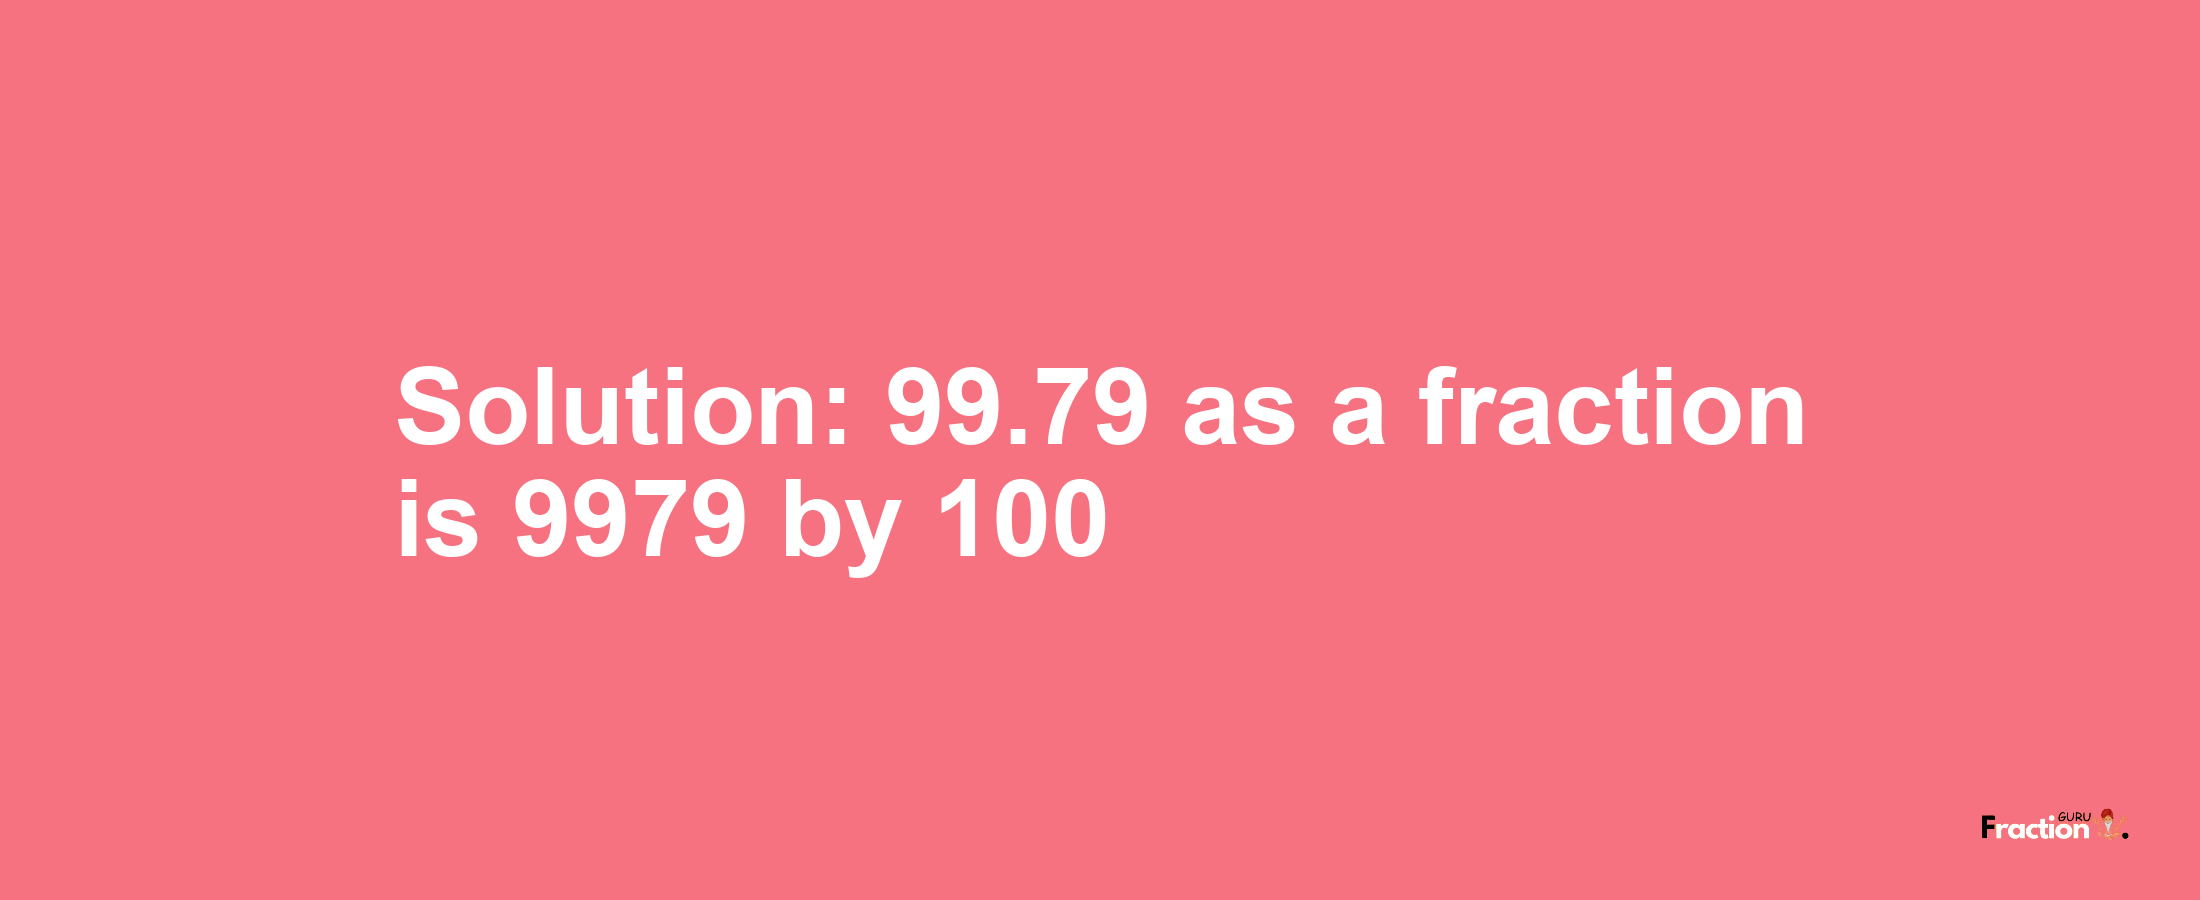 Solution:99.79 as a fraction is 9979/100